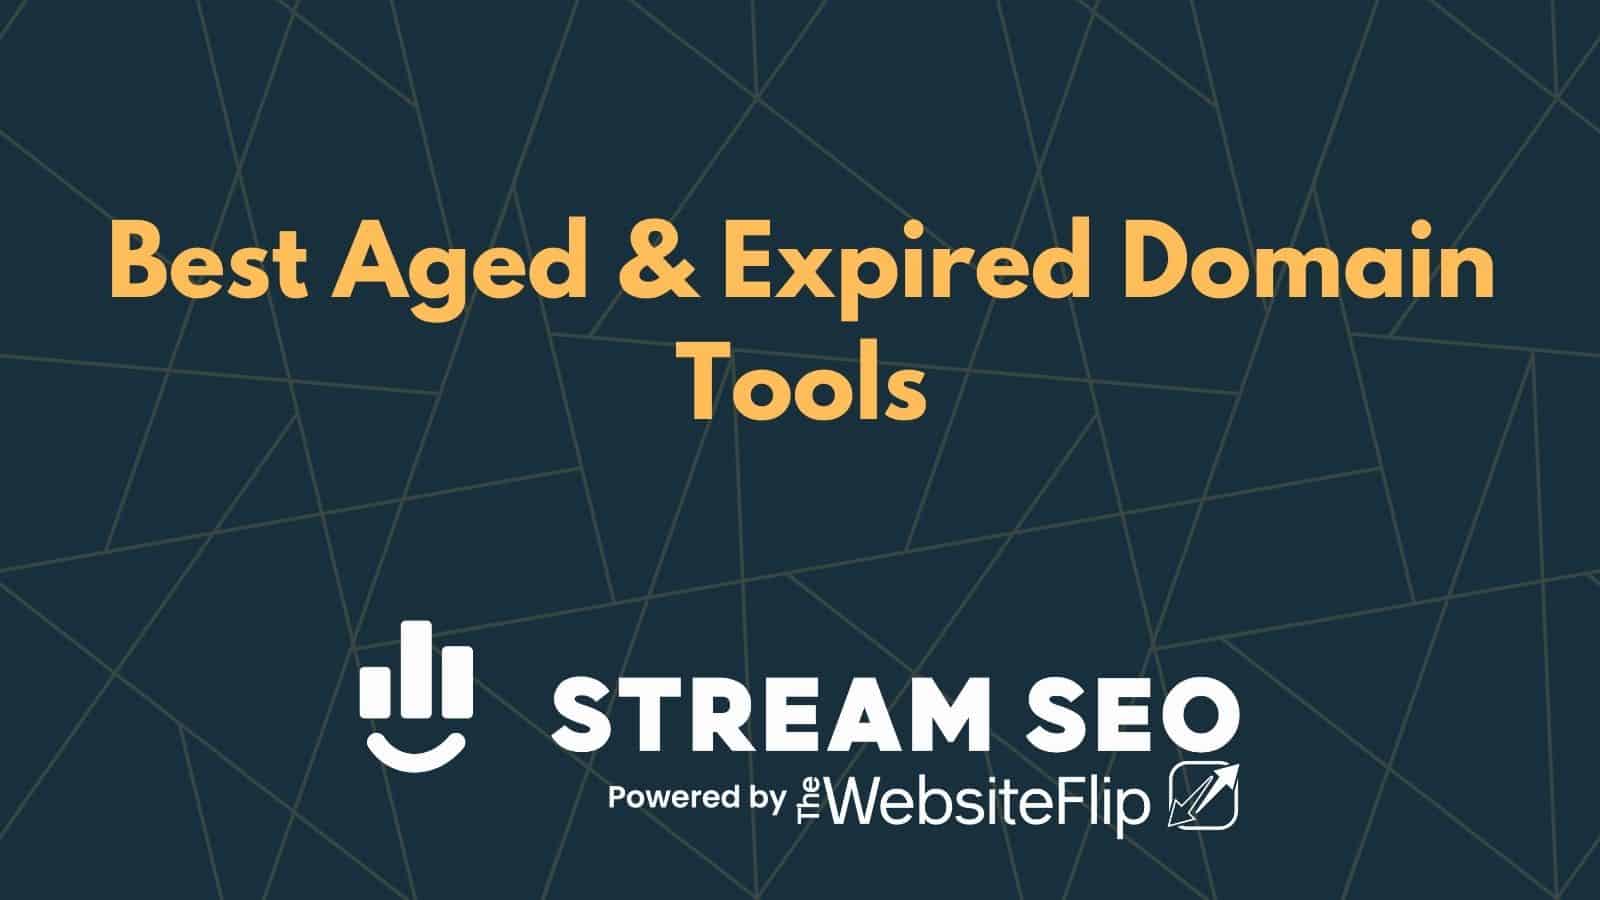 Best Aged & Expired Domain Tools